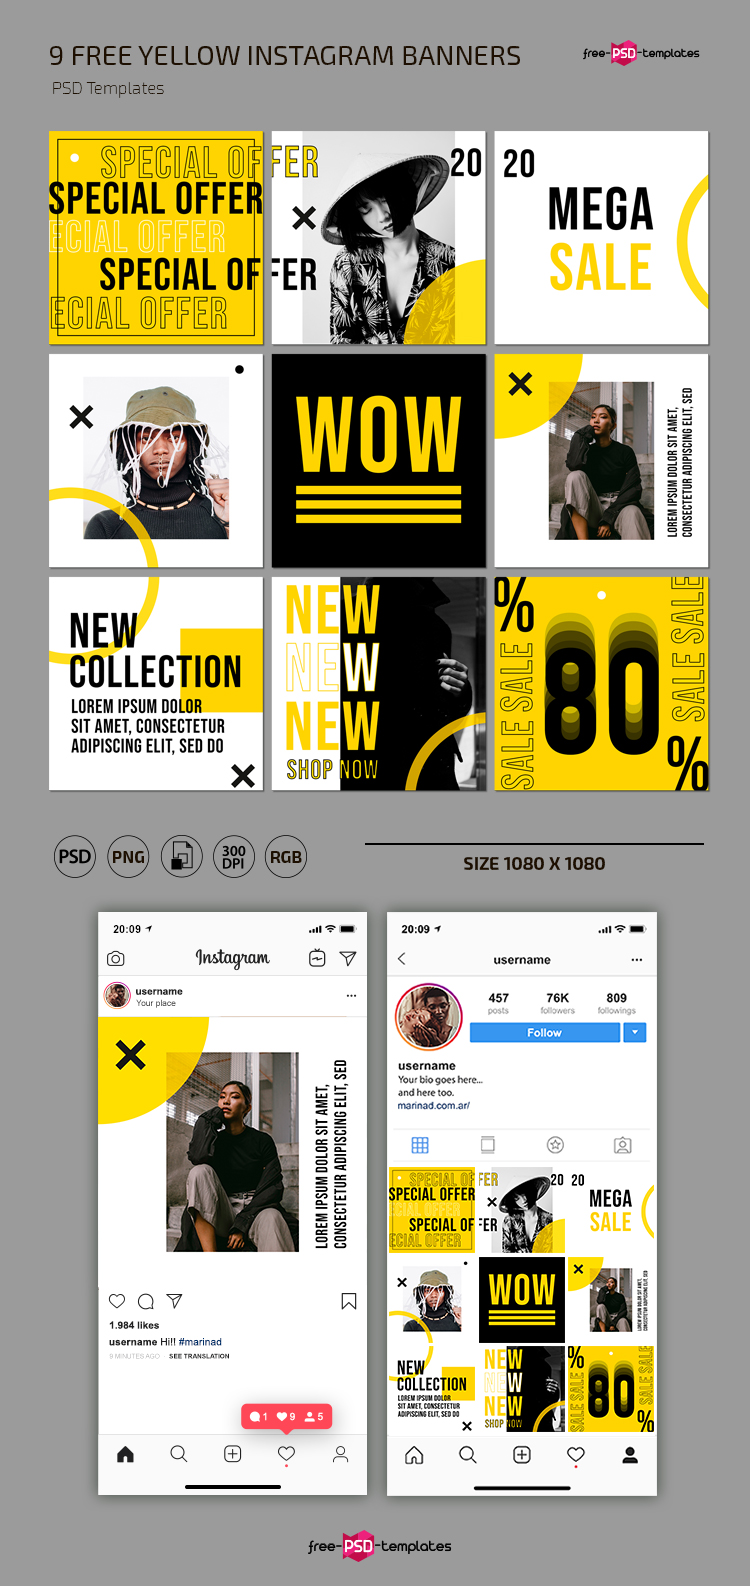 Download Free Yellow Instagram Posts Template In Psd Free Psd Templates